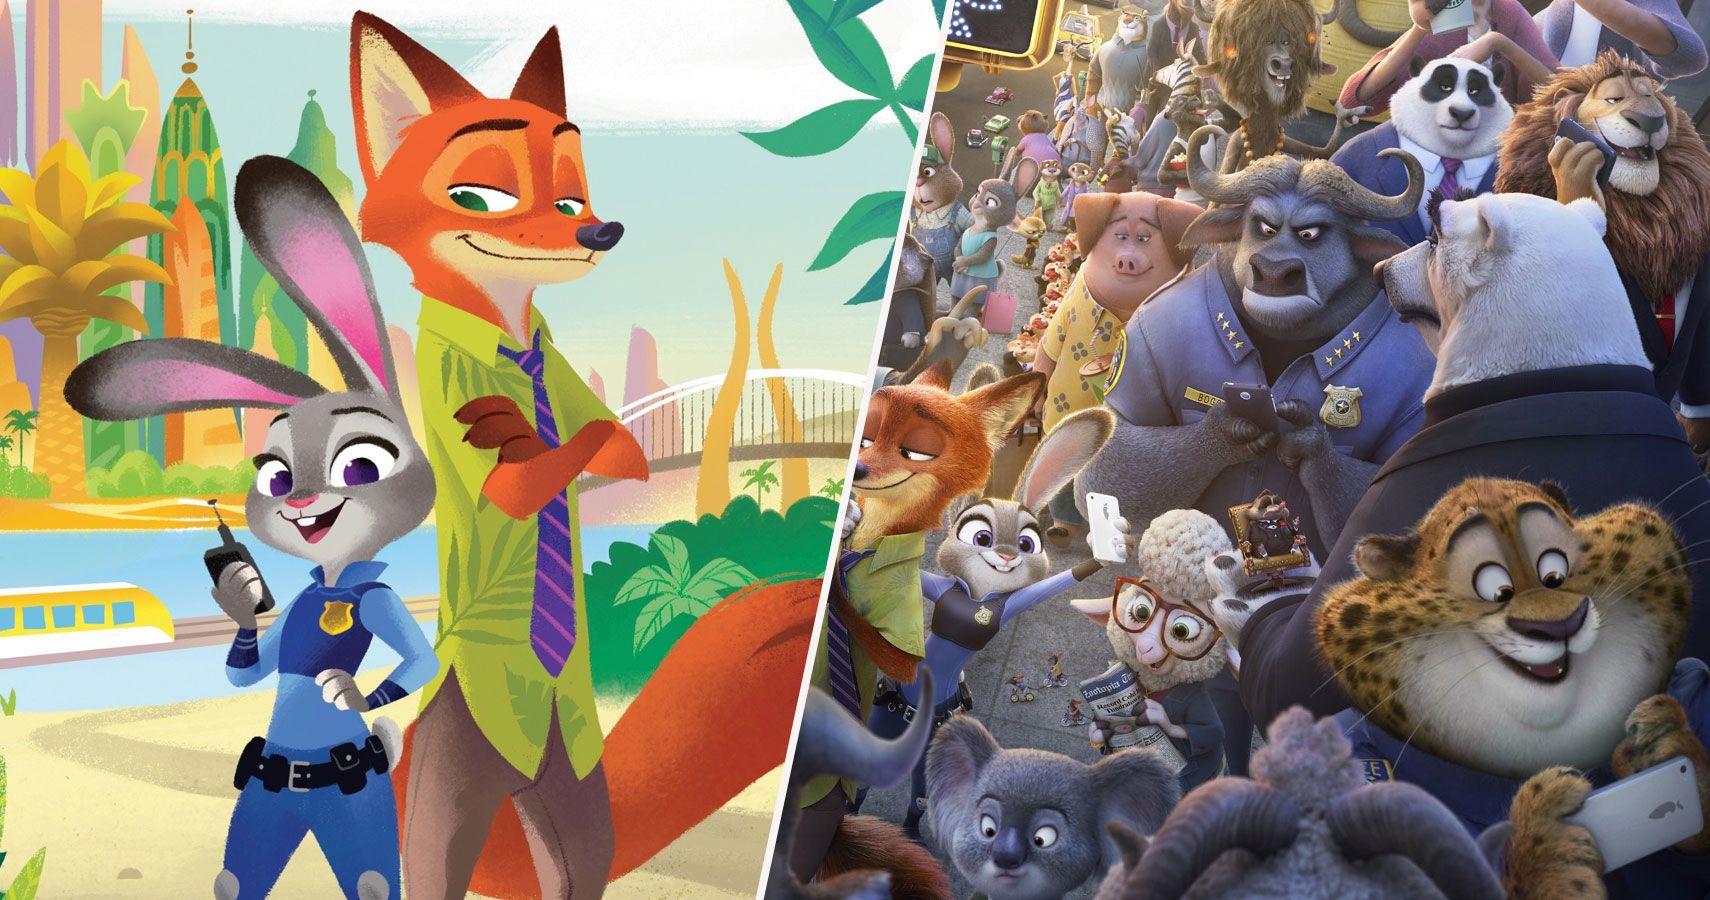 Zootopia Is One Of Disney's Top Grossing Films... So Where Are the ...